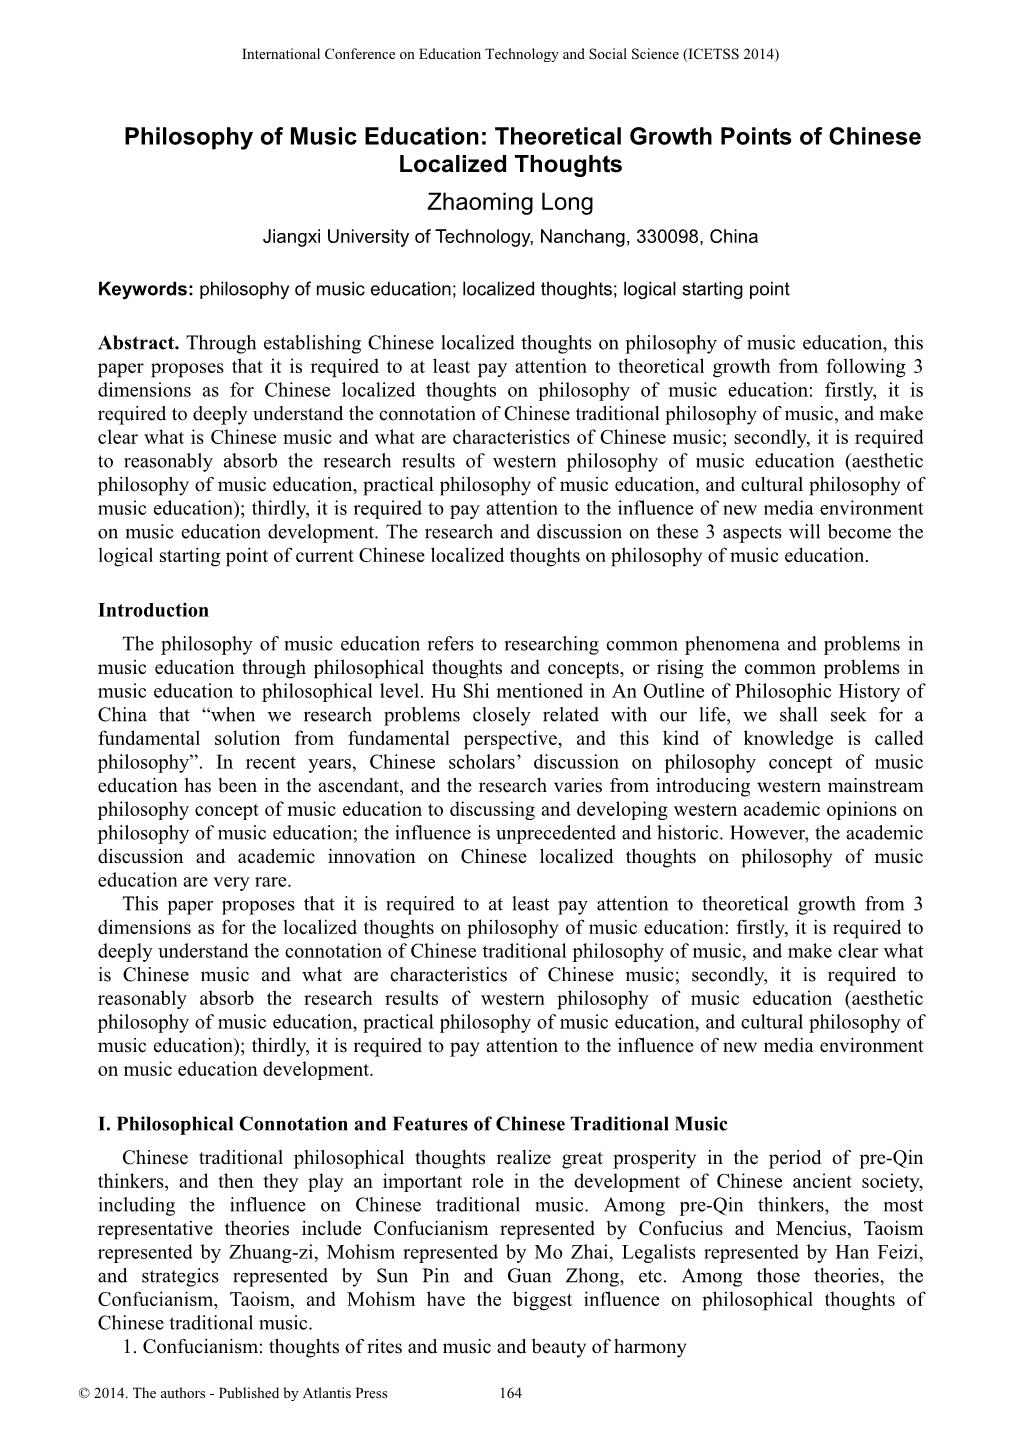 Philosophy of Music Education: Theoretical Growth Points of Chinese Localized Thoughts Zhaoming Long Jiangxi University of Technology, Nanchang, 330098, China